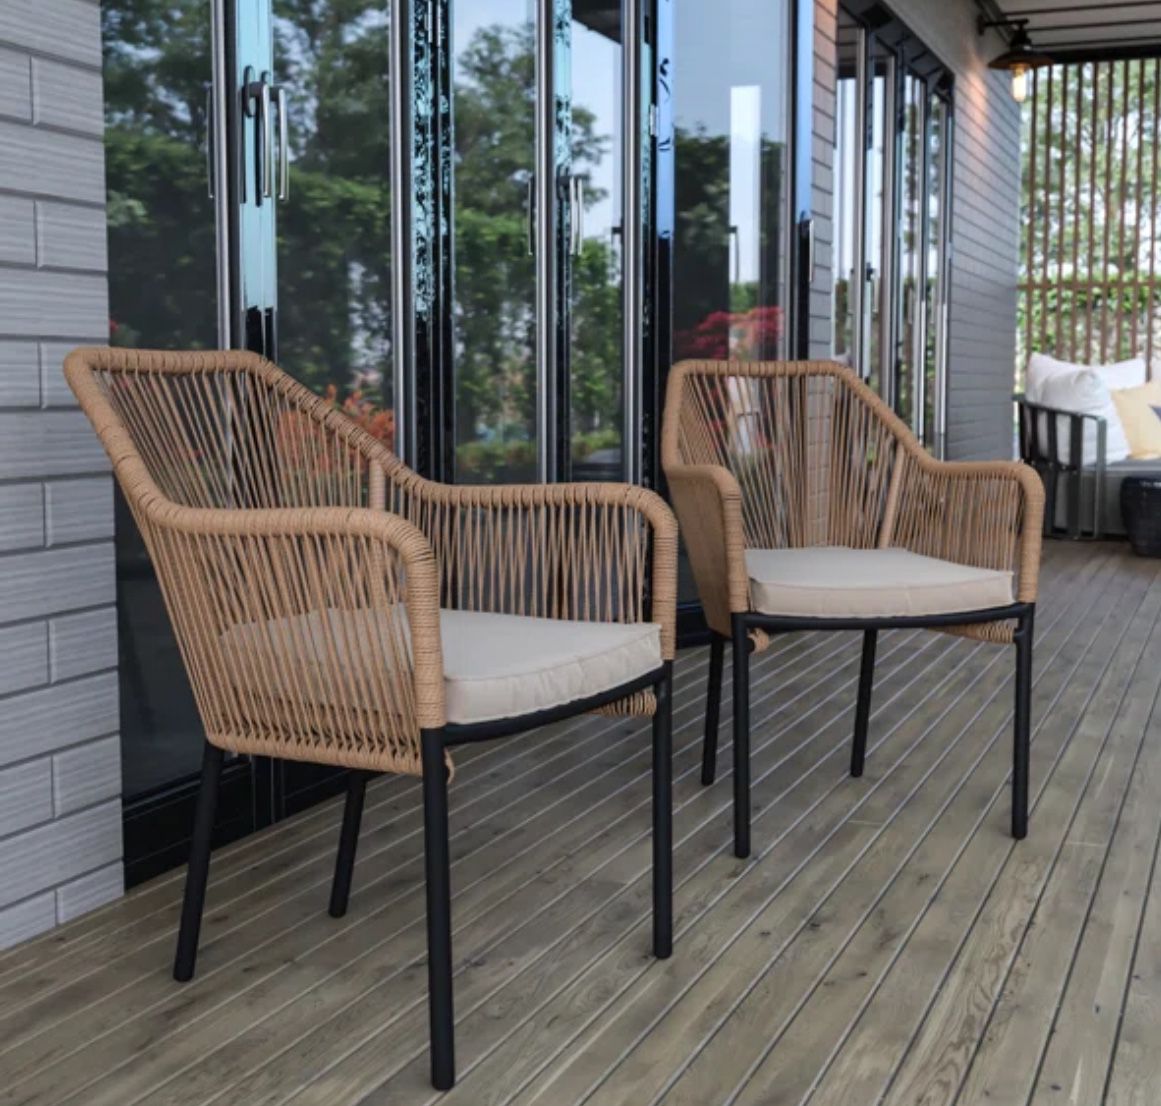 Avarti Woven Outdoor Chairs